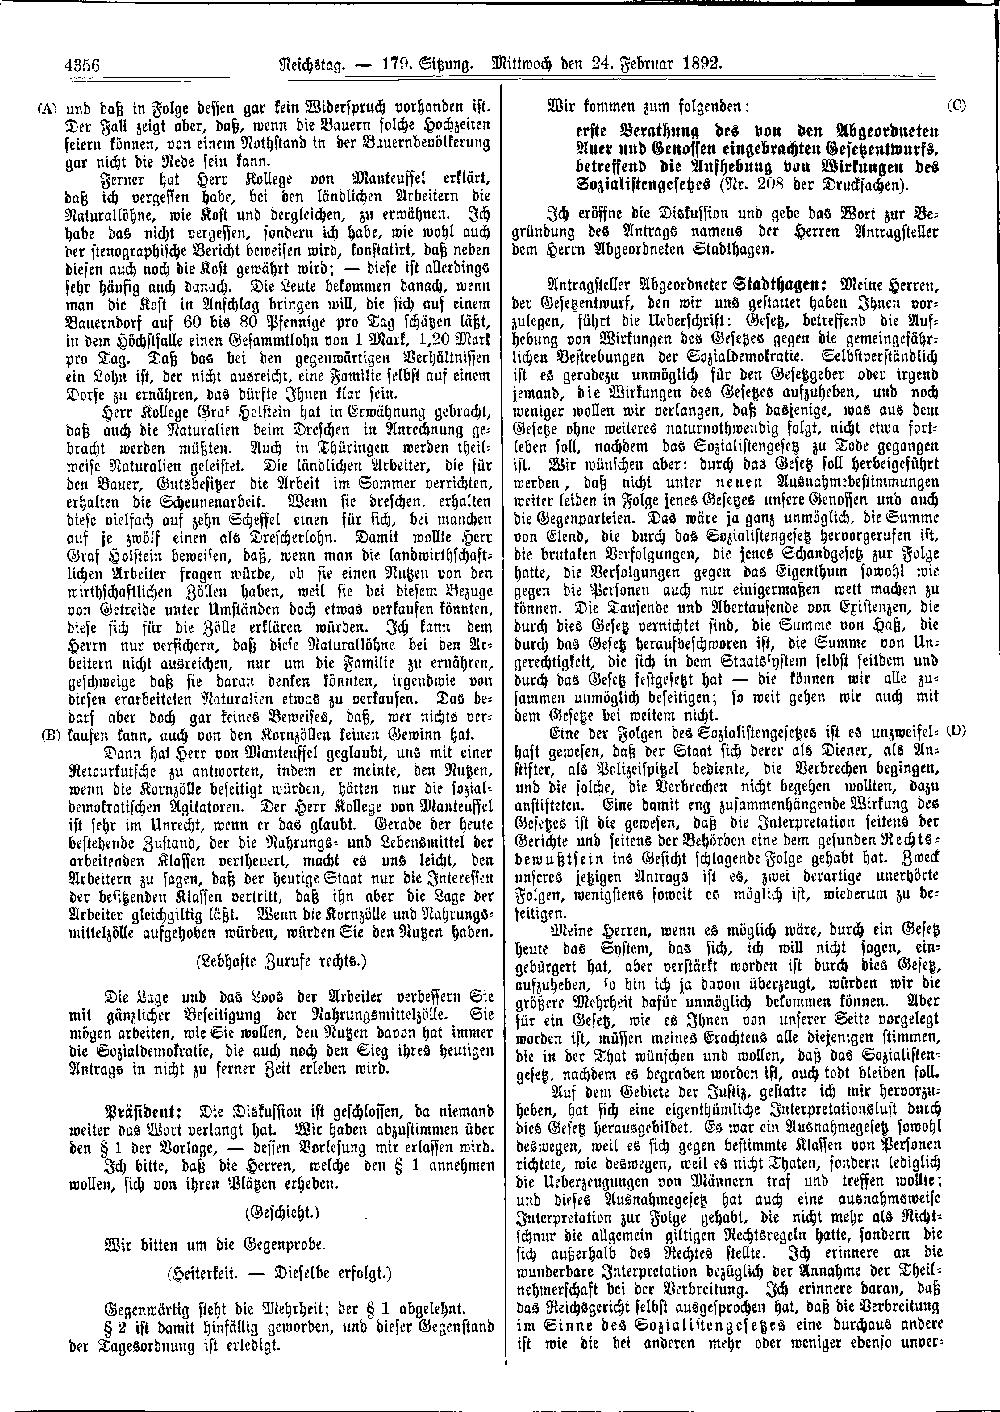 Scan of page 4356